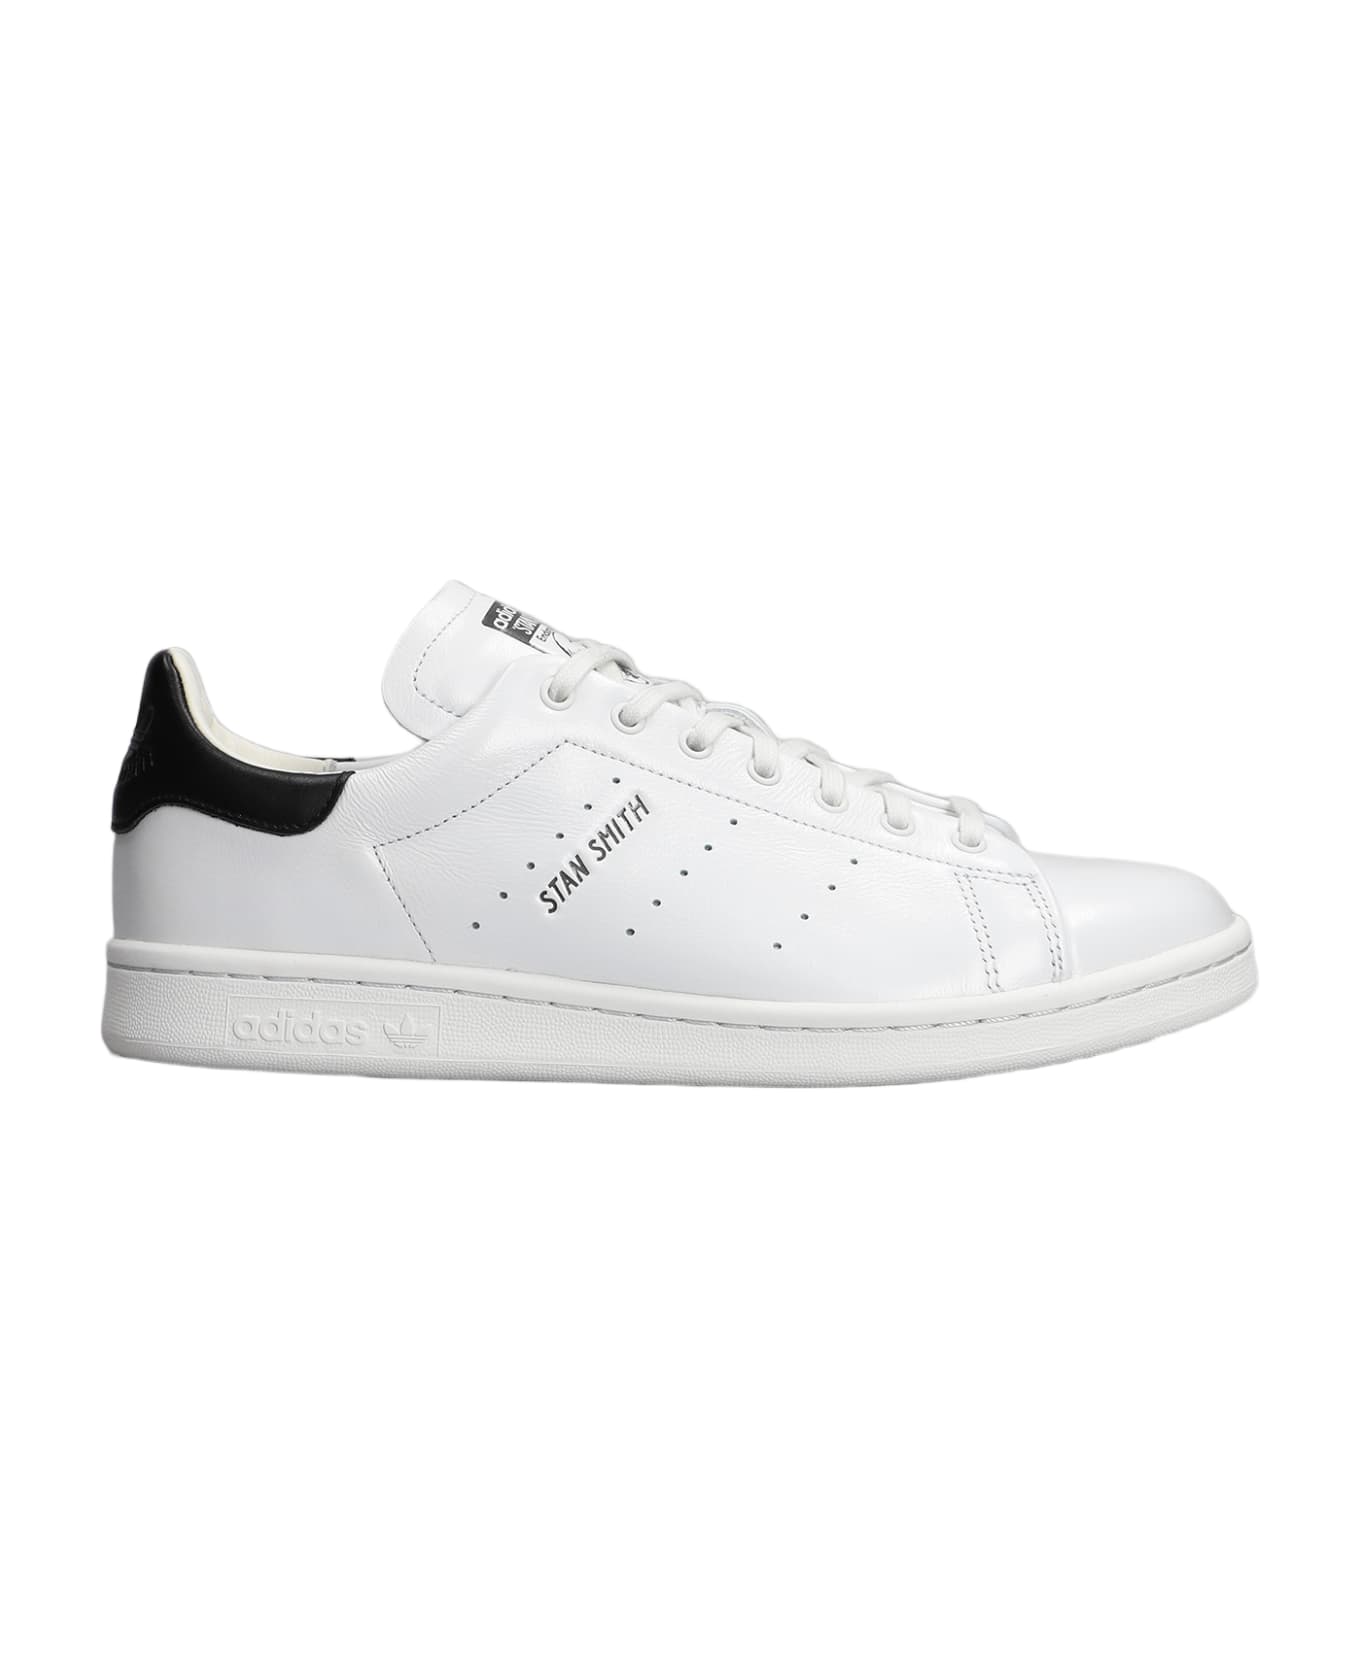 Adidas Stan Smith Lux Sneakers In White Leather - WHITE